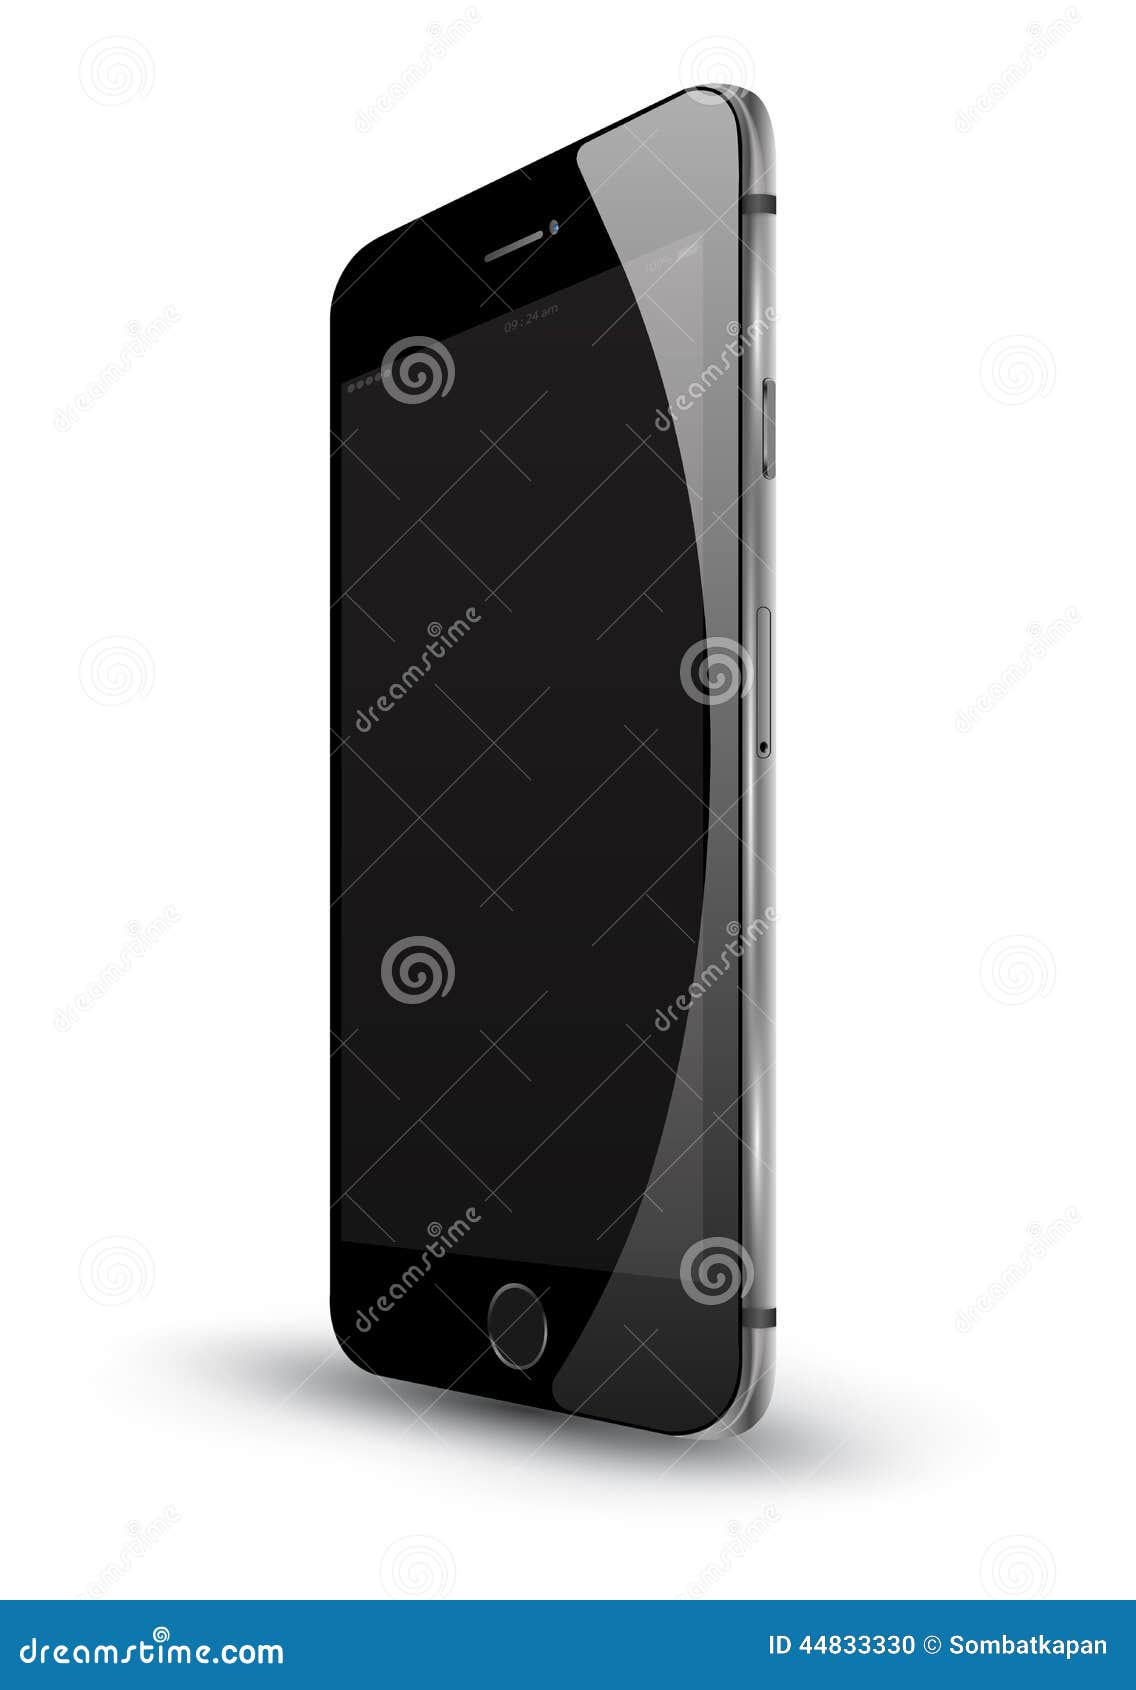 Realistic smartphone stock vector. Illustration of call - 44833330